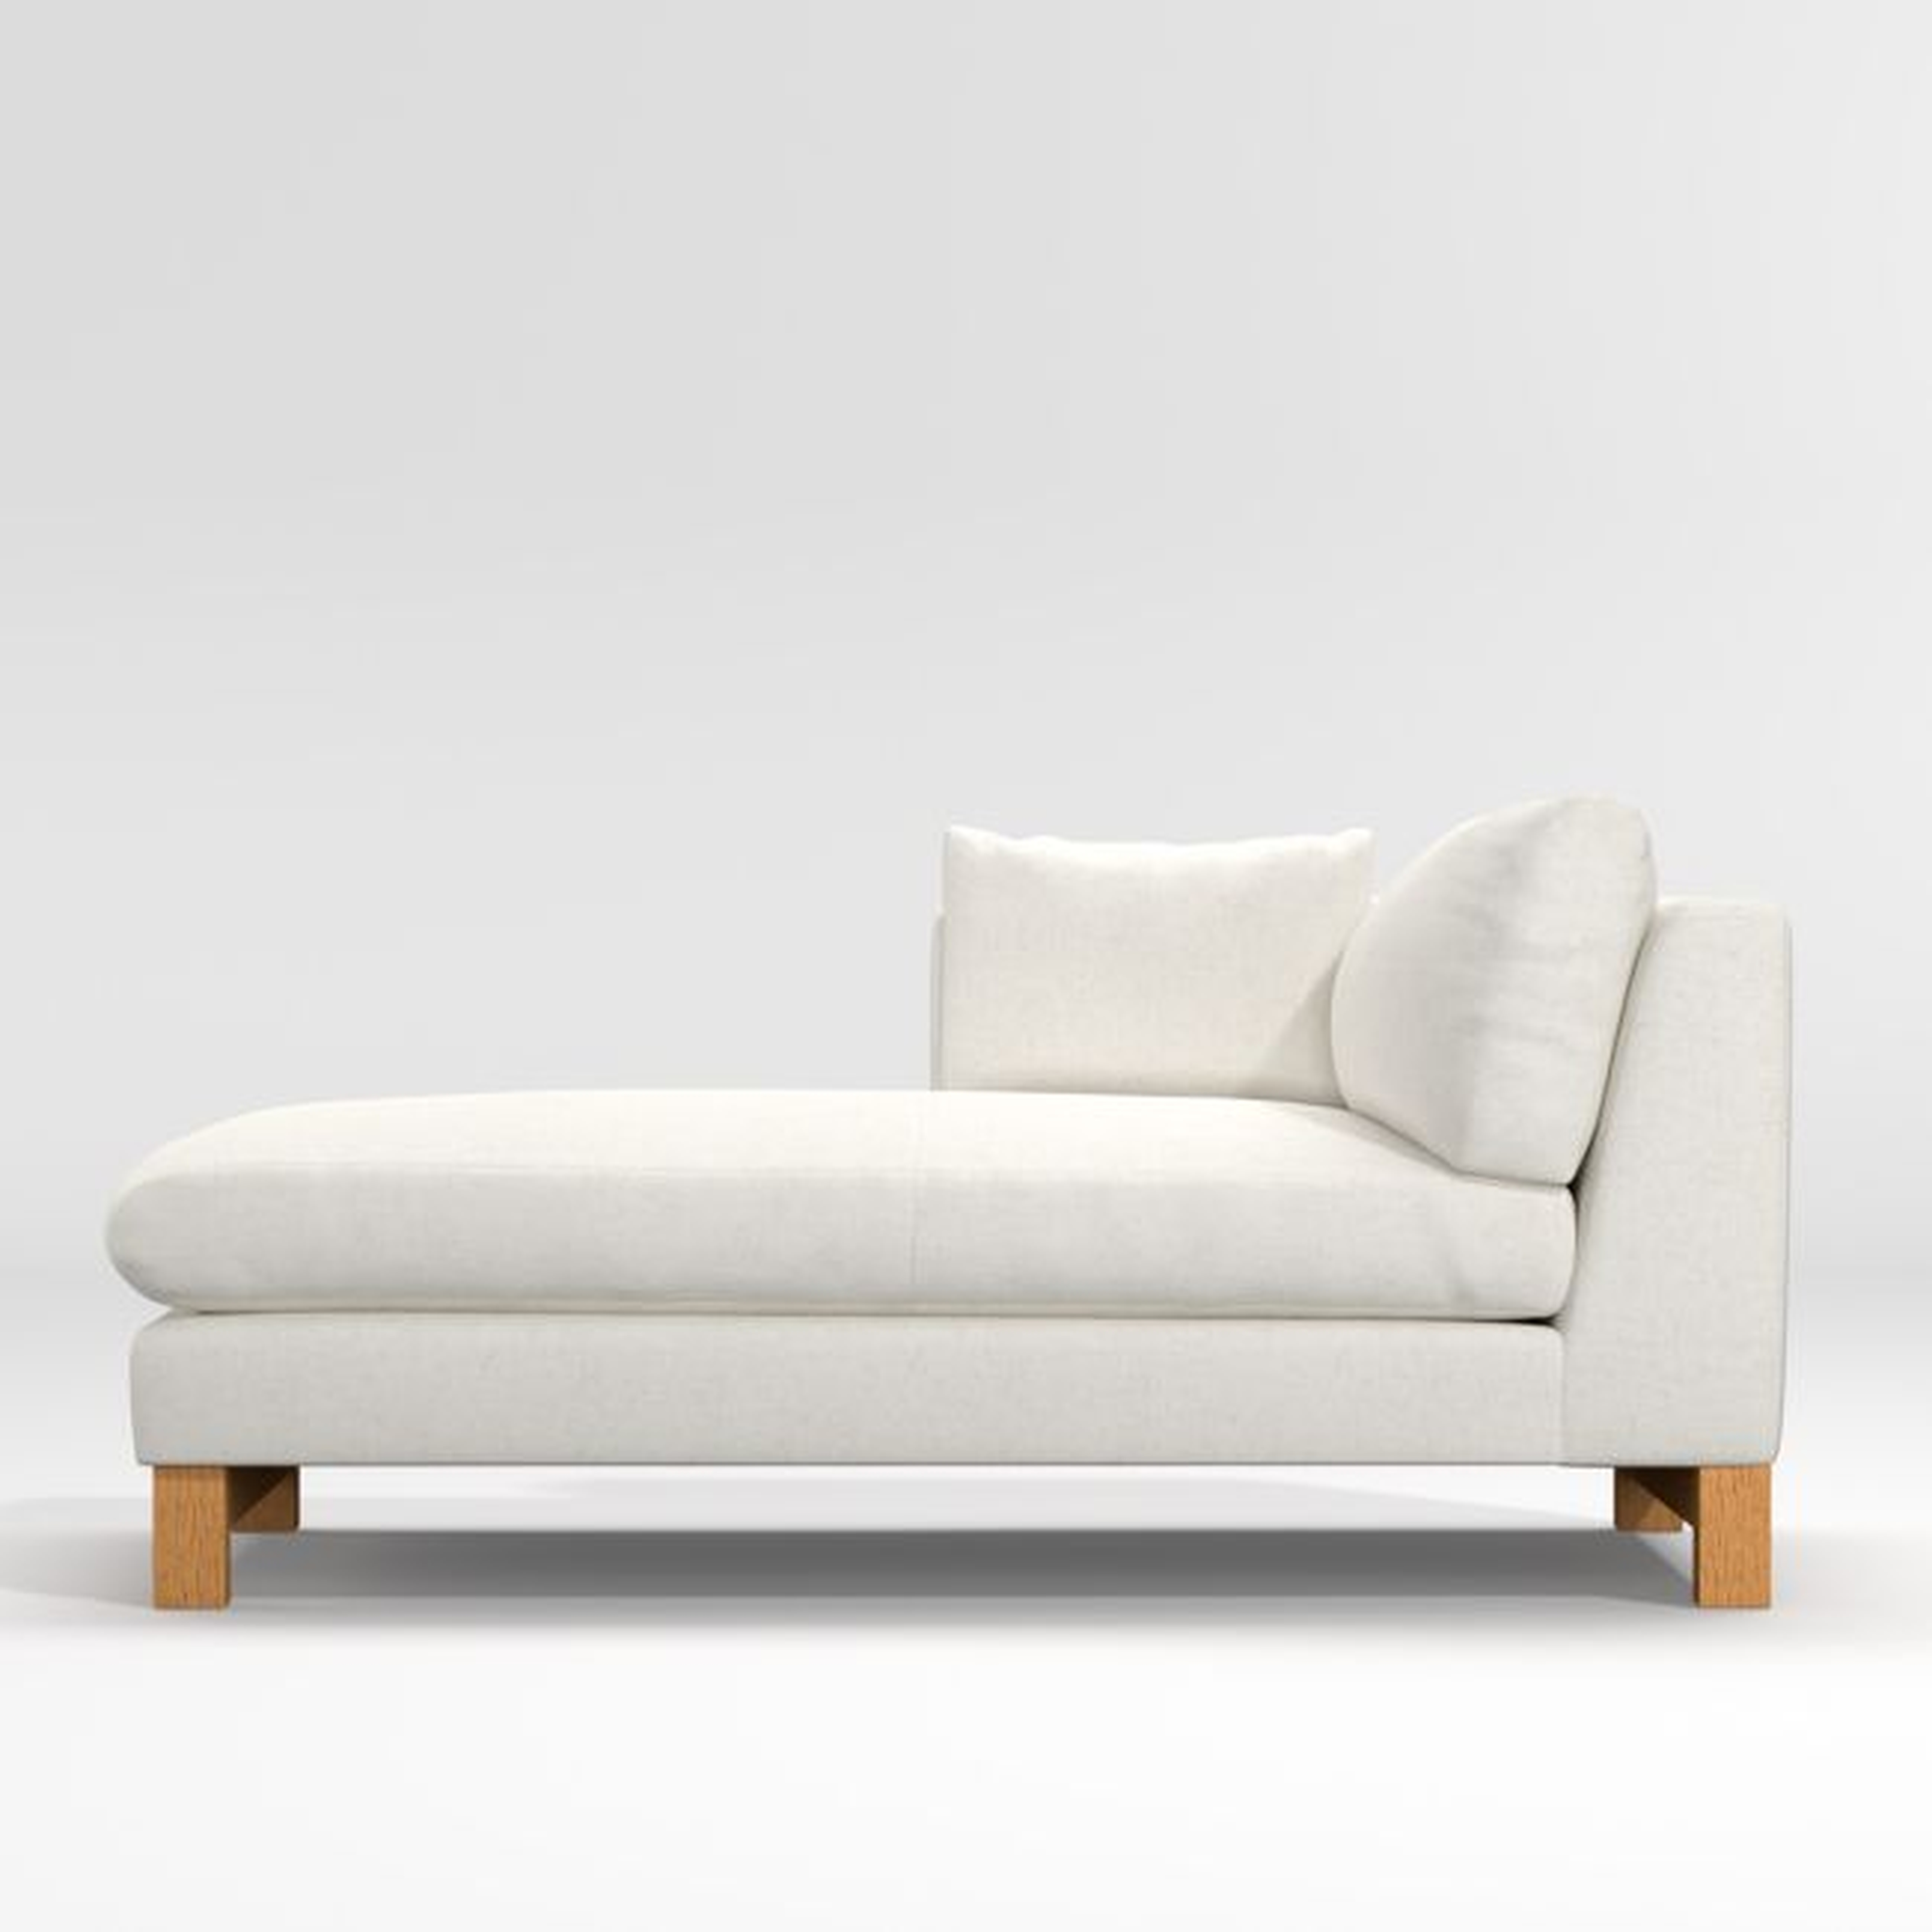 Pacific Left-Arm Chaise Lounge with Wood Legs - Crate and Barrel